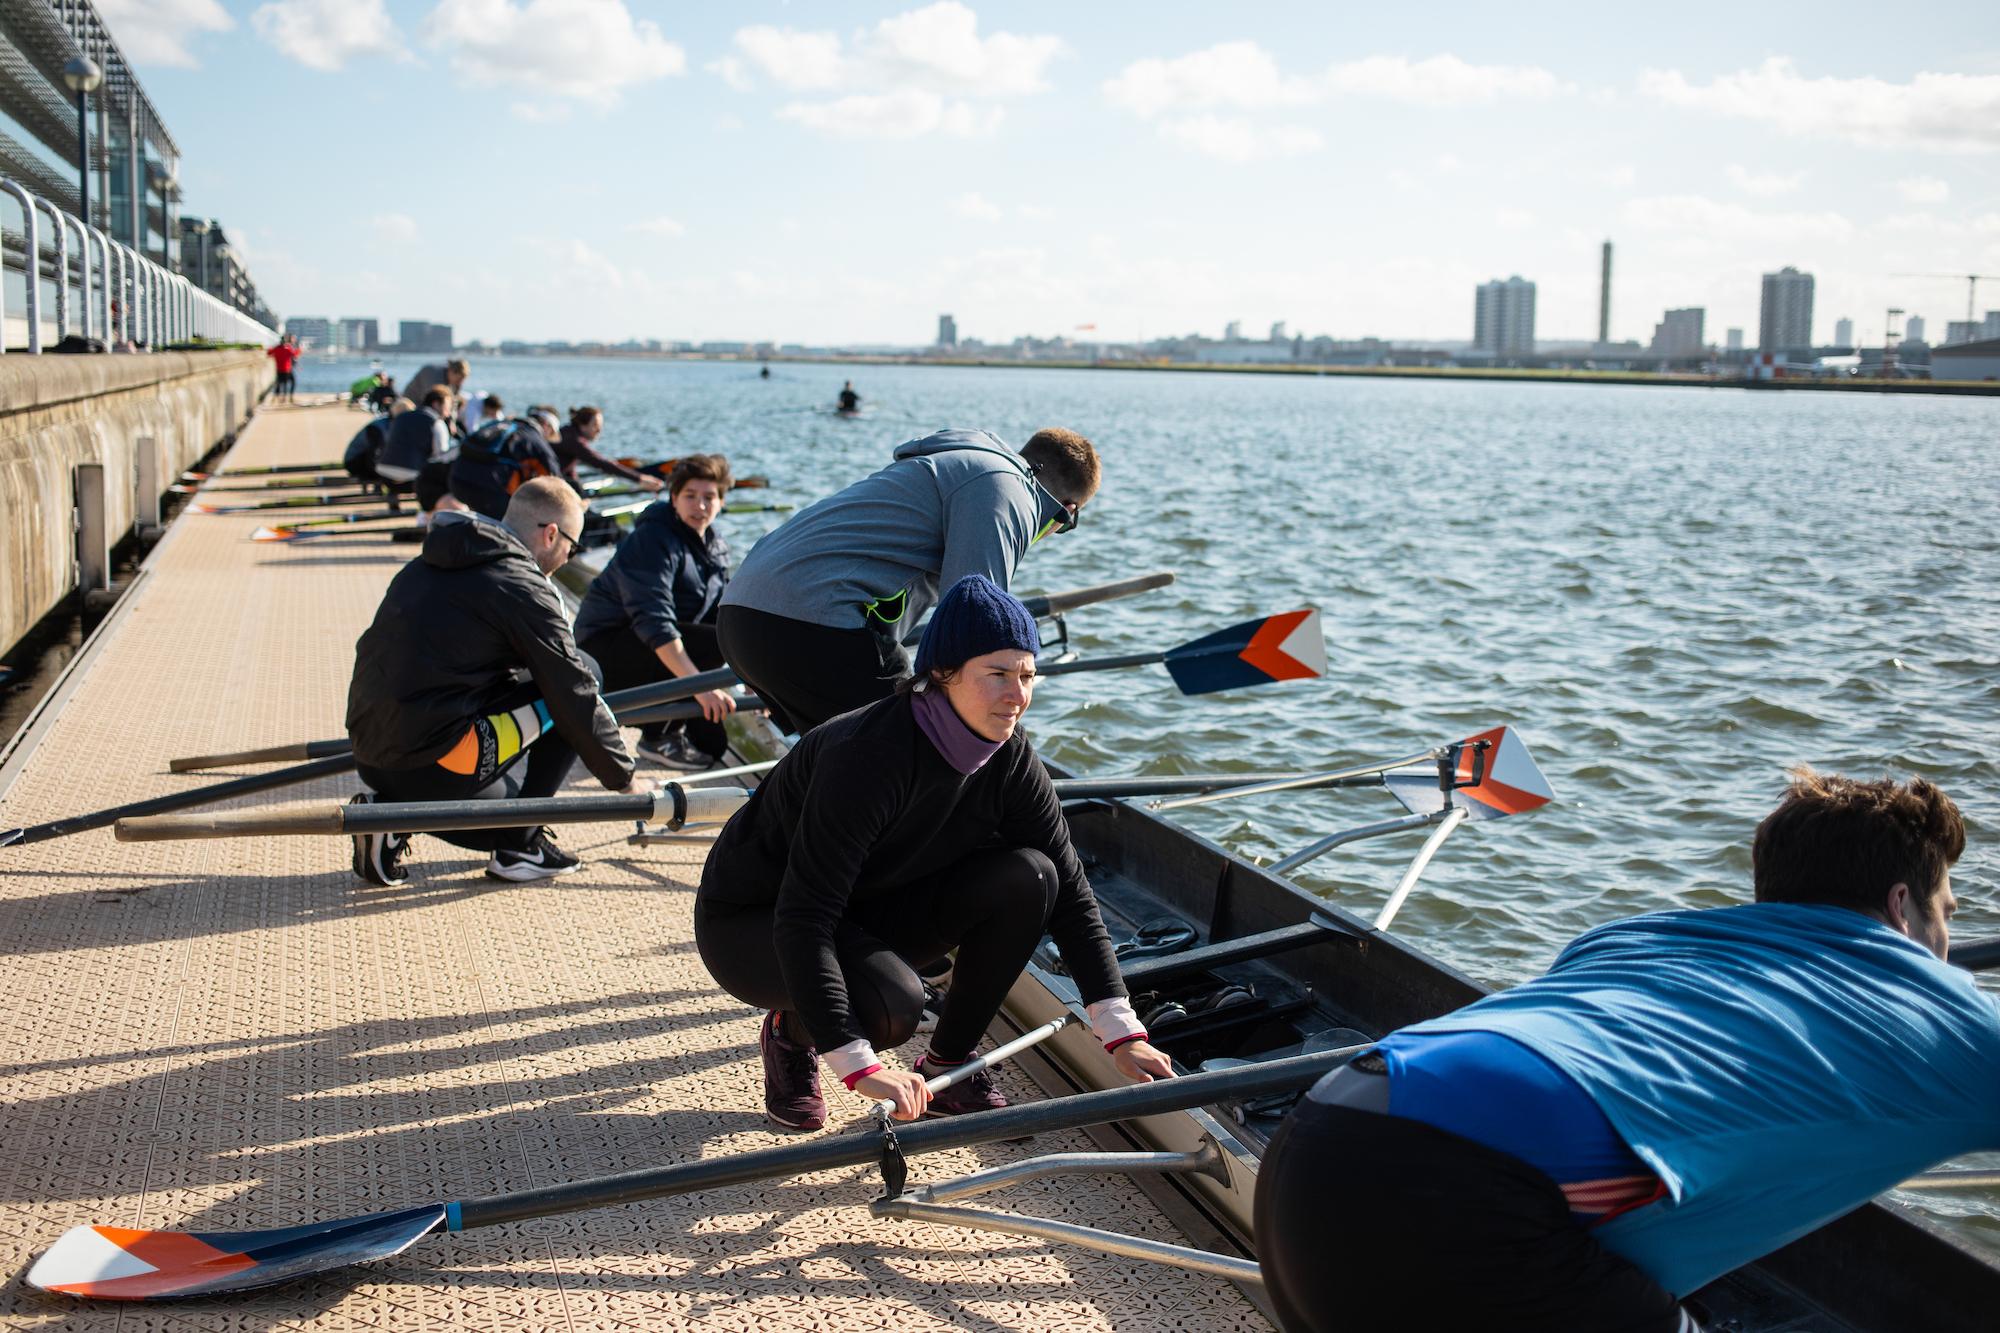 rowers crouched down to prepare the boat before getting onto the water